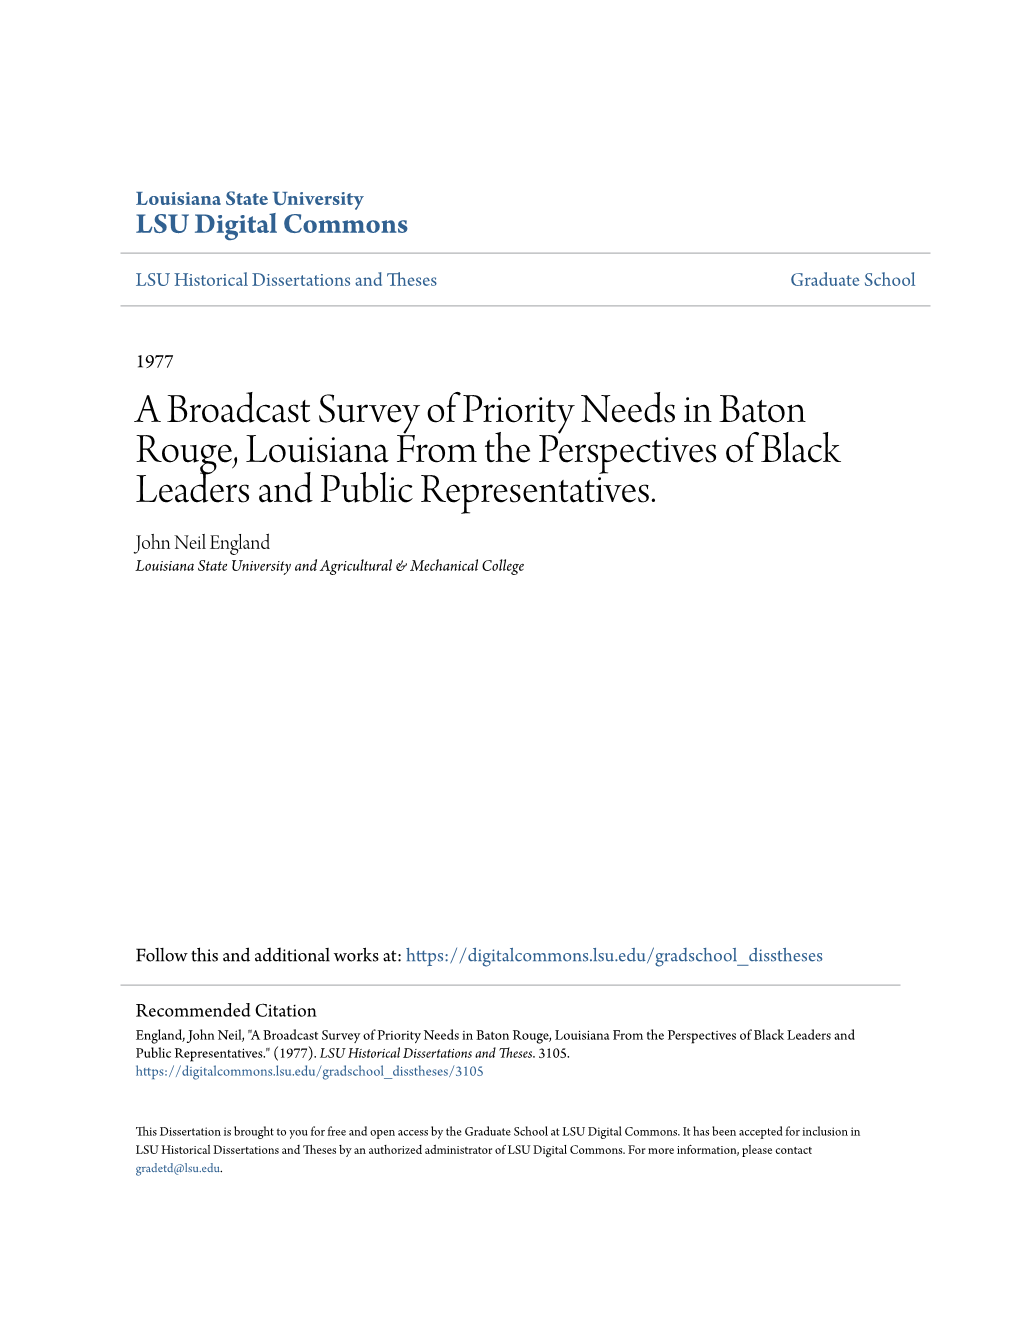 A Broadcast Survey of Priority Needs in Baton Rouge, Louisiana from the Perspectives of Black Leaders and Public Representatives